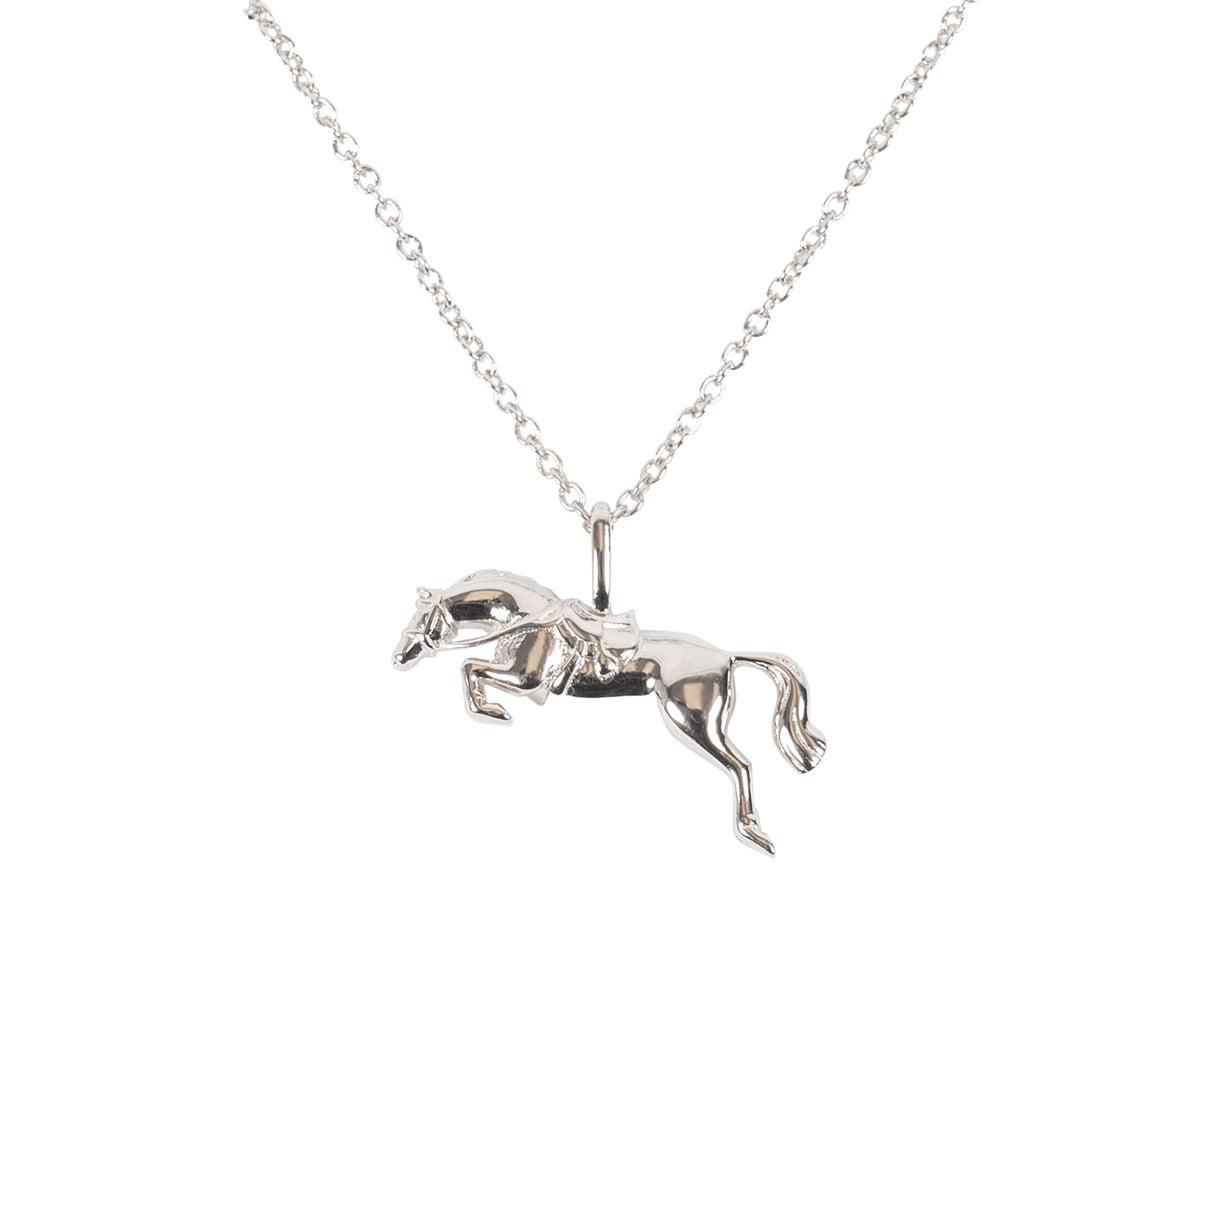 Cinto by Kelly Herd Jumping Pendant Necklace